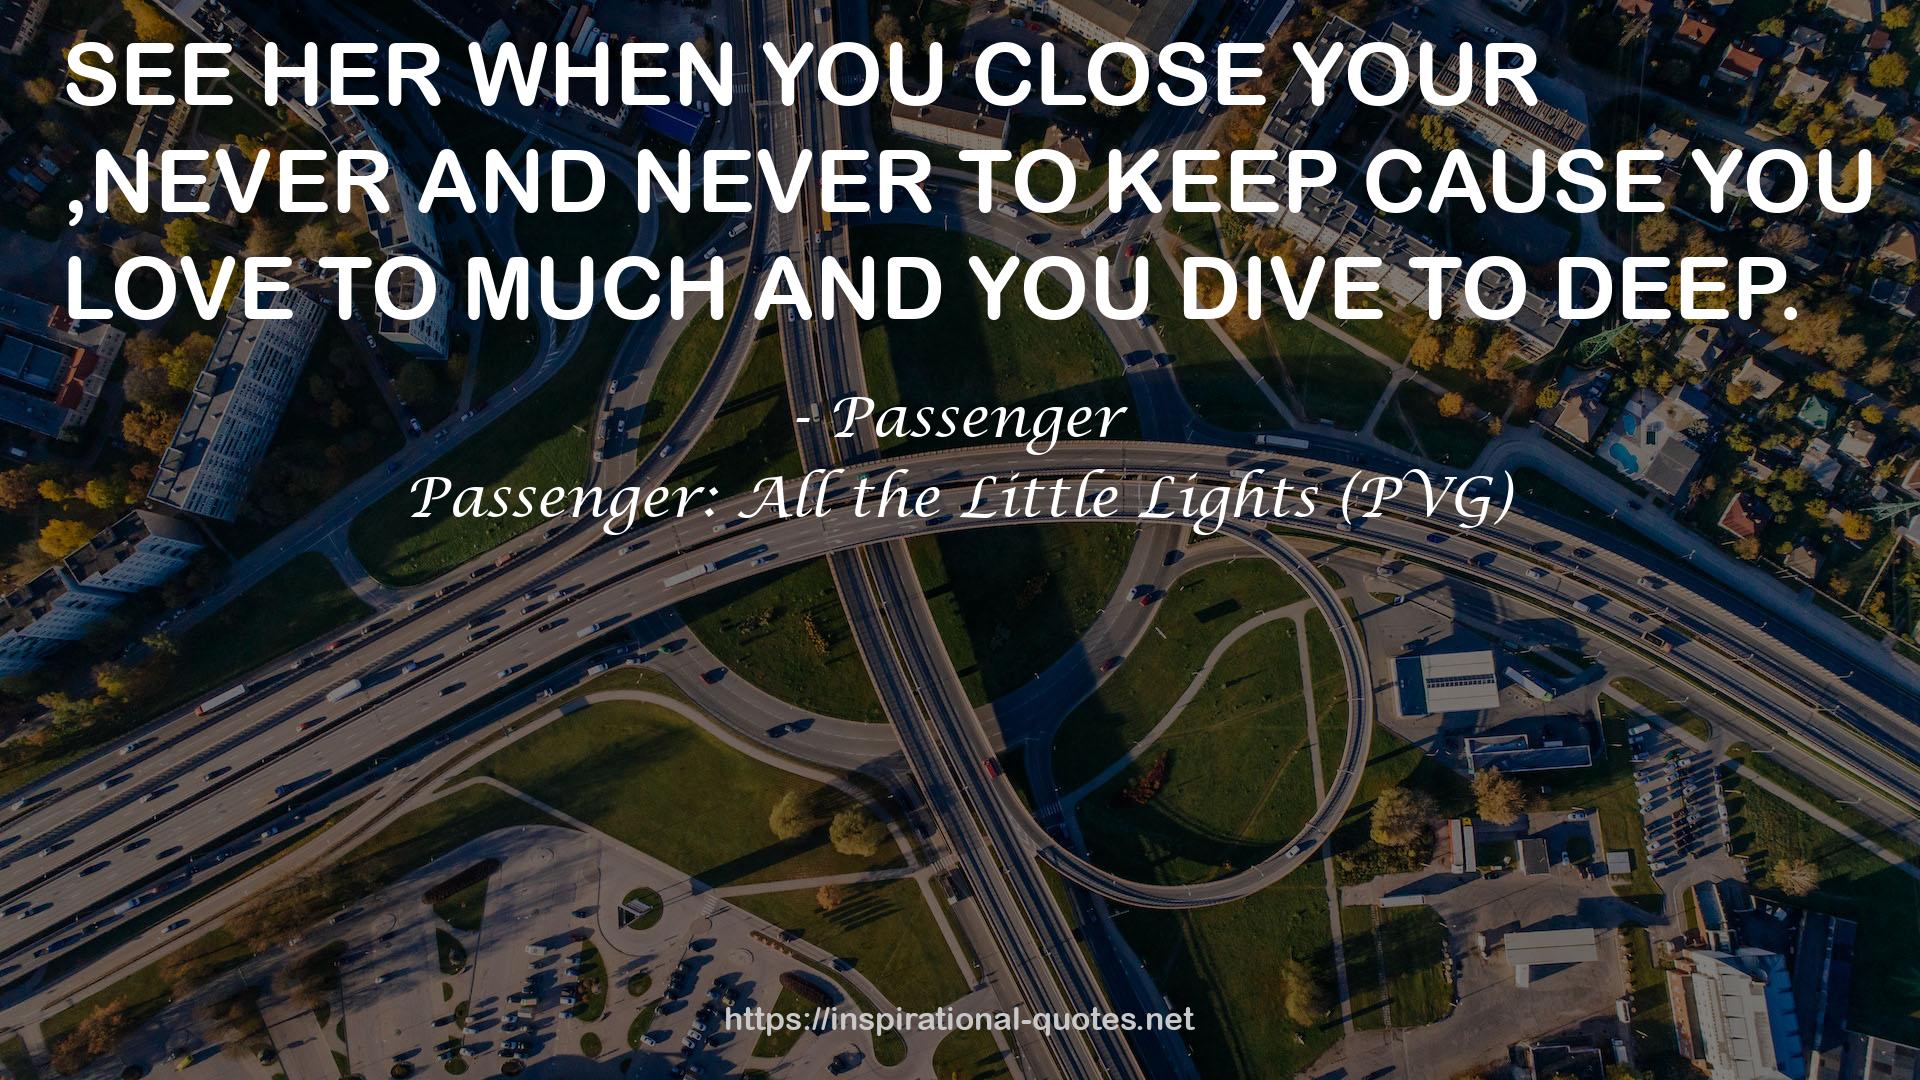 Passenger: All the Little Lights (PVG) QUOTES